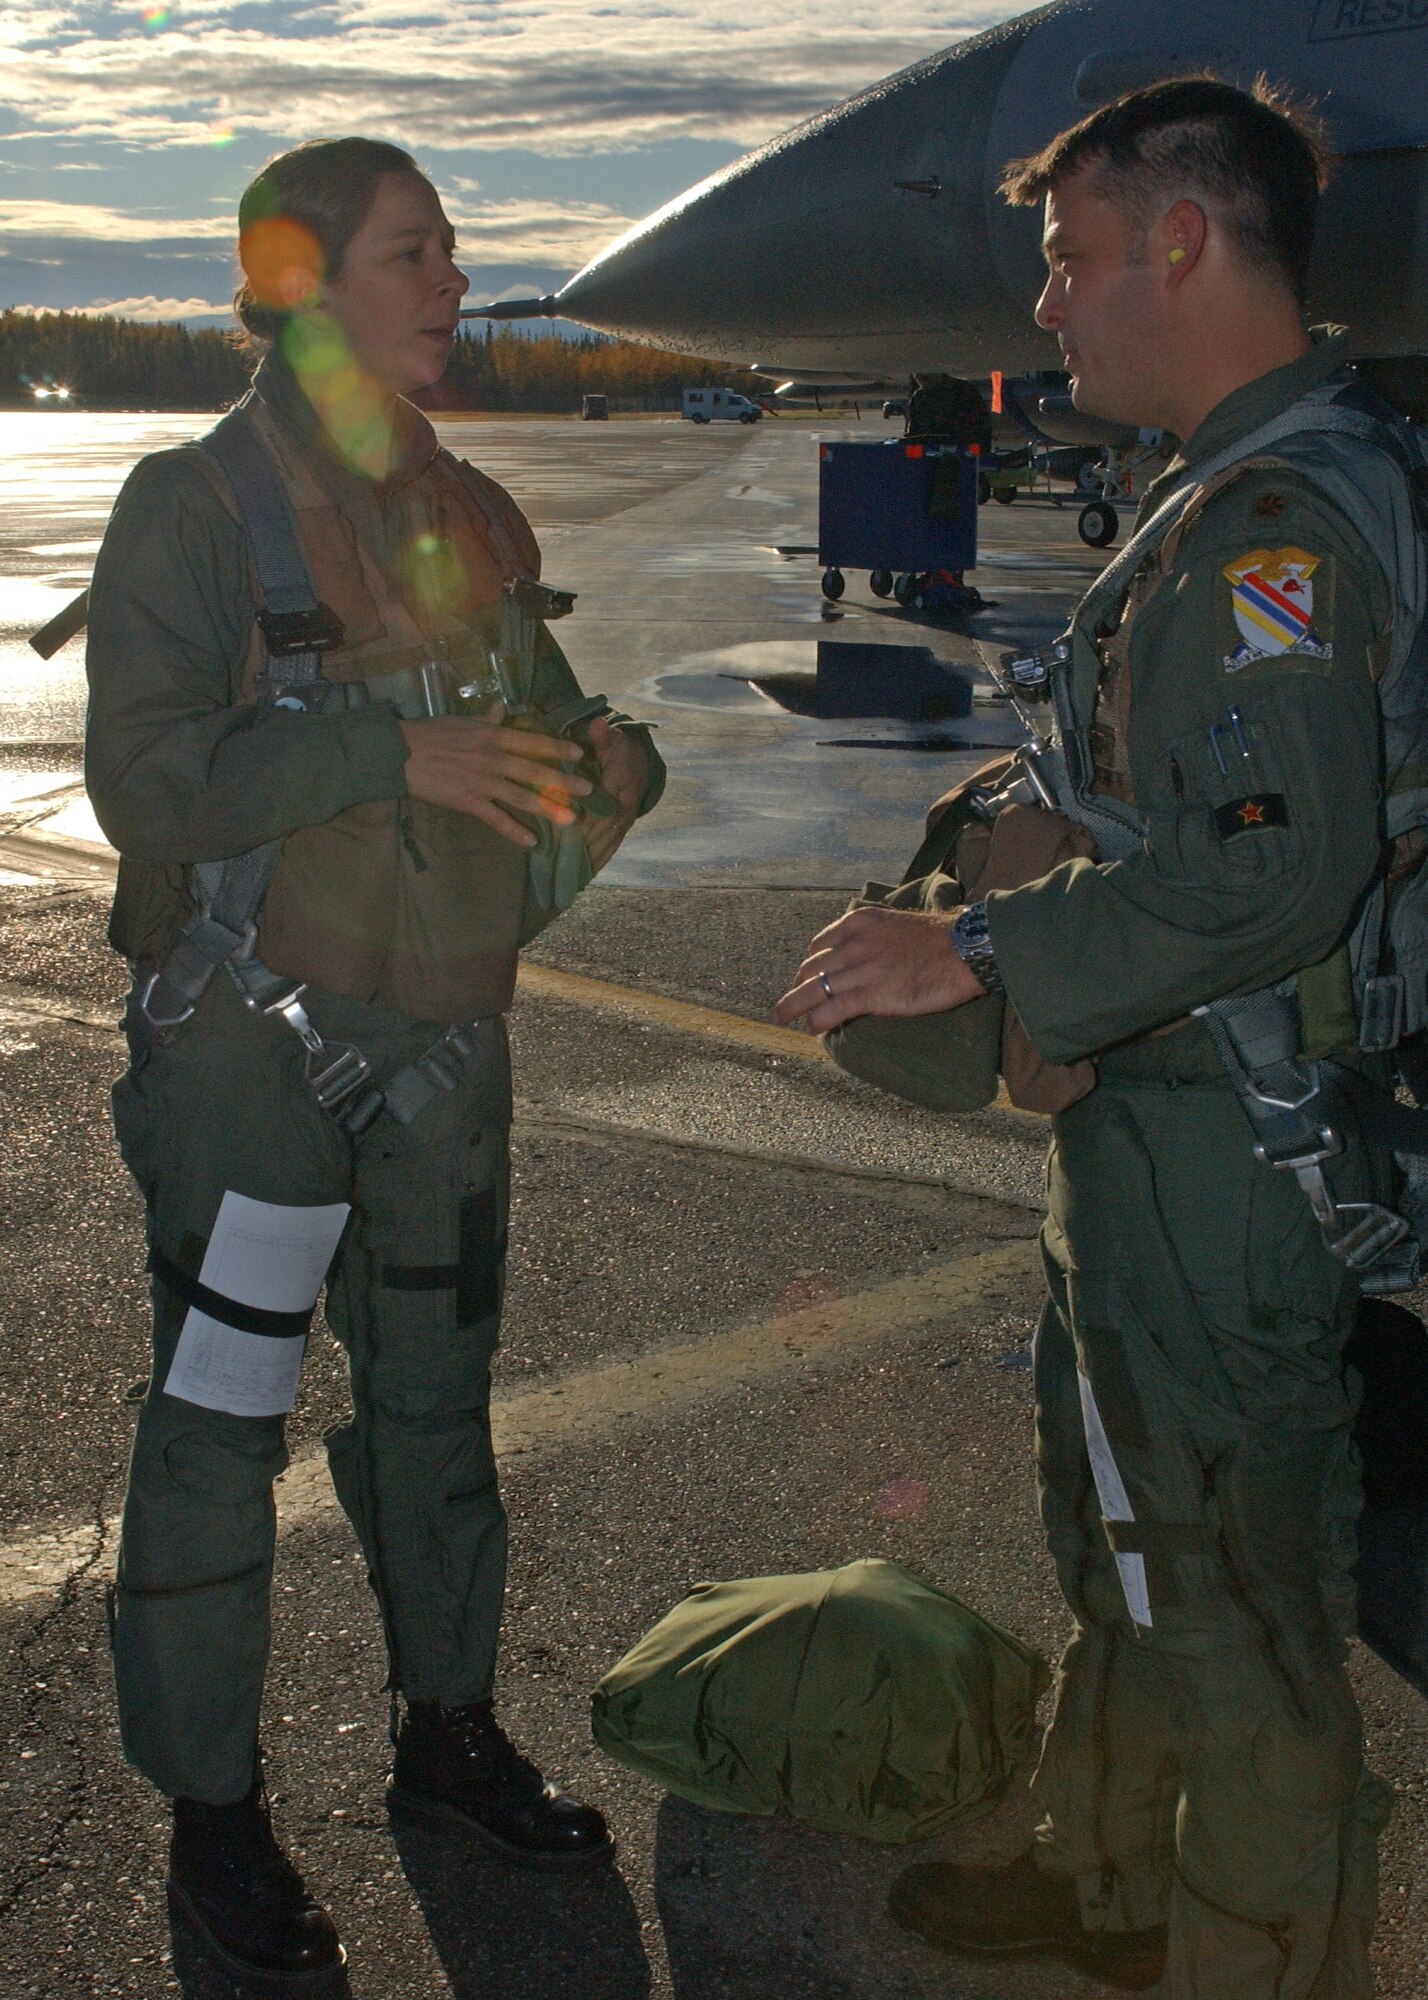 EIELSON AIR FORCE BASE, Alaska--Maj. Norman Johnsen, 354th Operations Support Squadron F-16 pilot, gives Master Sgt. Deanna Croxen, Eielson Airman Leadership School instructor, a pre-flight briefing before her F-16 incentive ride Sept. 13. The incentive program's purpose is for group commanders to acknowledge the hard work and dedication of their Airmen. (U.S. Air Force photo by Airman 1st Class Nora Anton)                                        